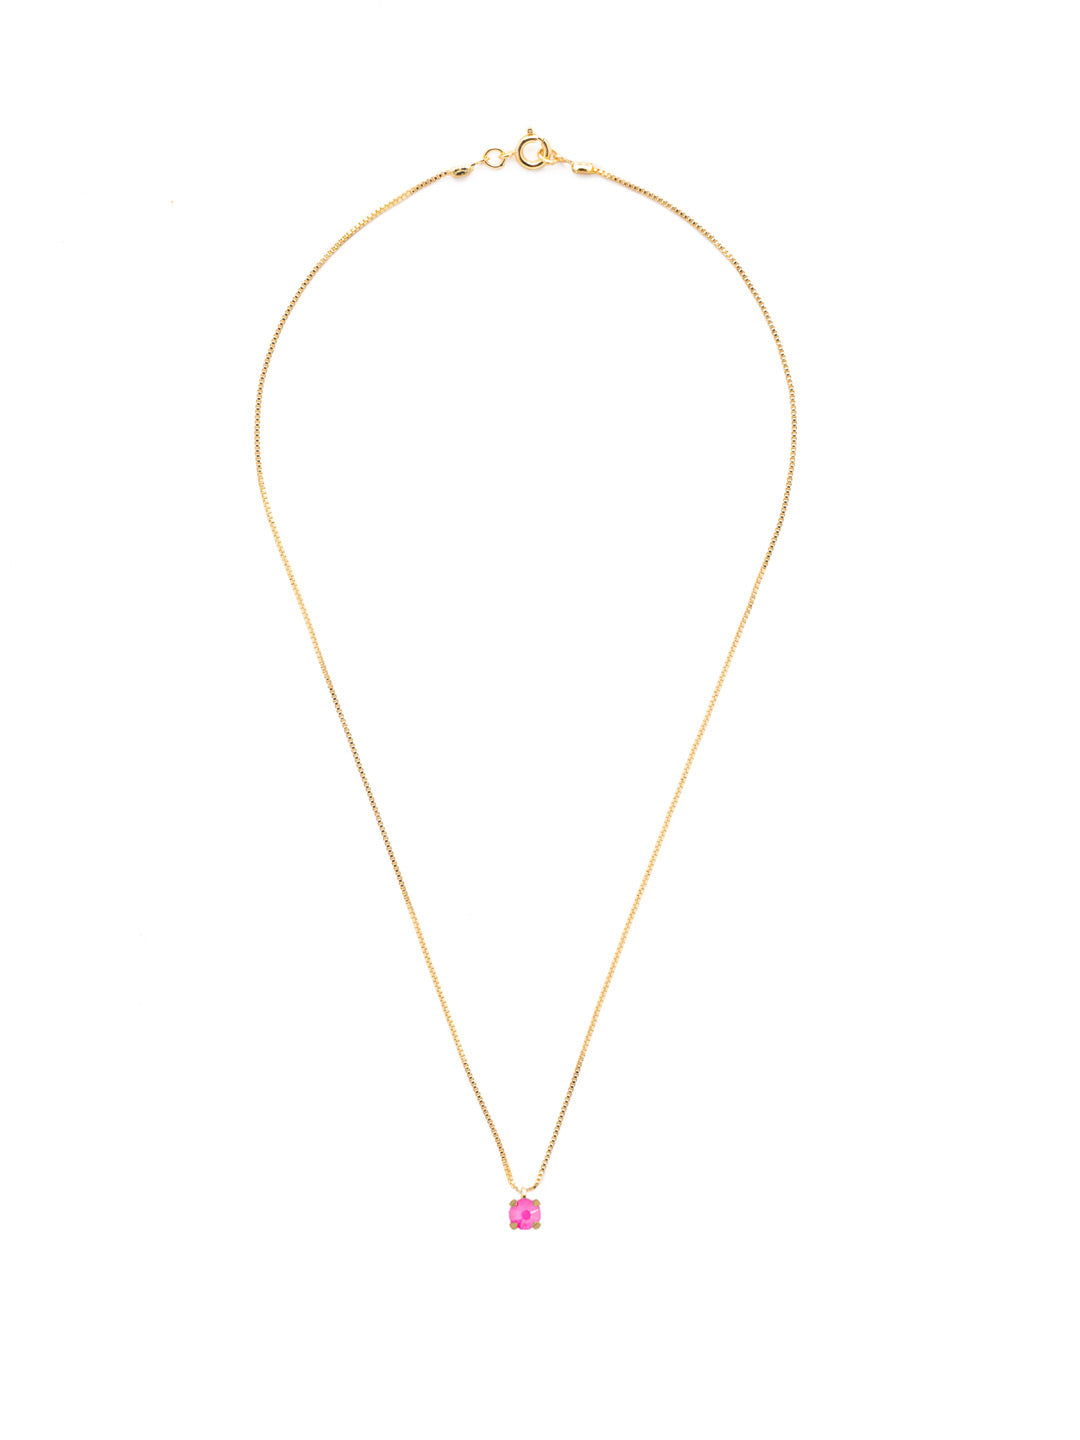 Aria Studded Pendant Necklace - NFL88BGETP - <p>The Aria Studded Pendant Necklace features a single small round cut crystal dangling from a delicate chain, secured with a spring ring clasp. From Sorrelli's Electric Pink collection in our Bright Gold-tone finish.</p>